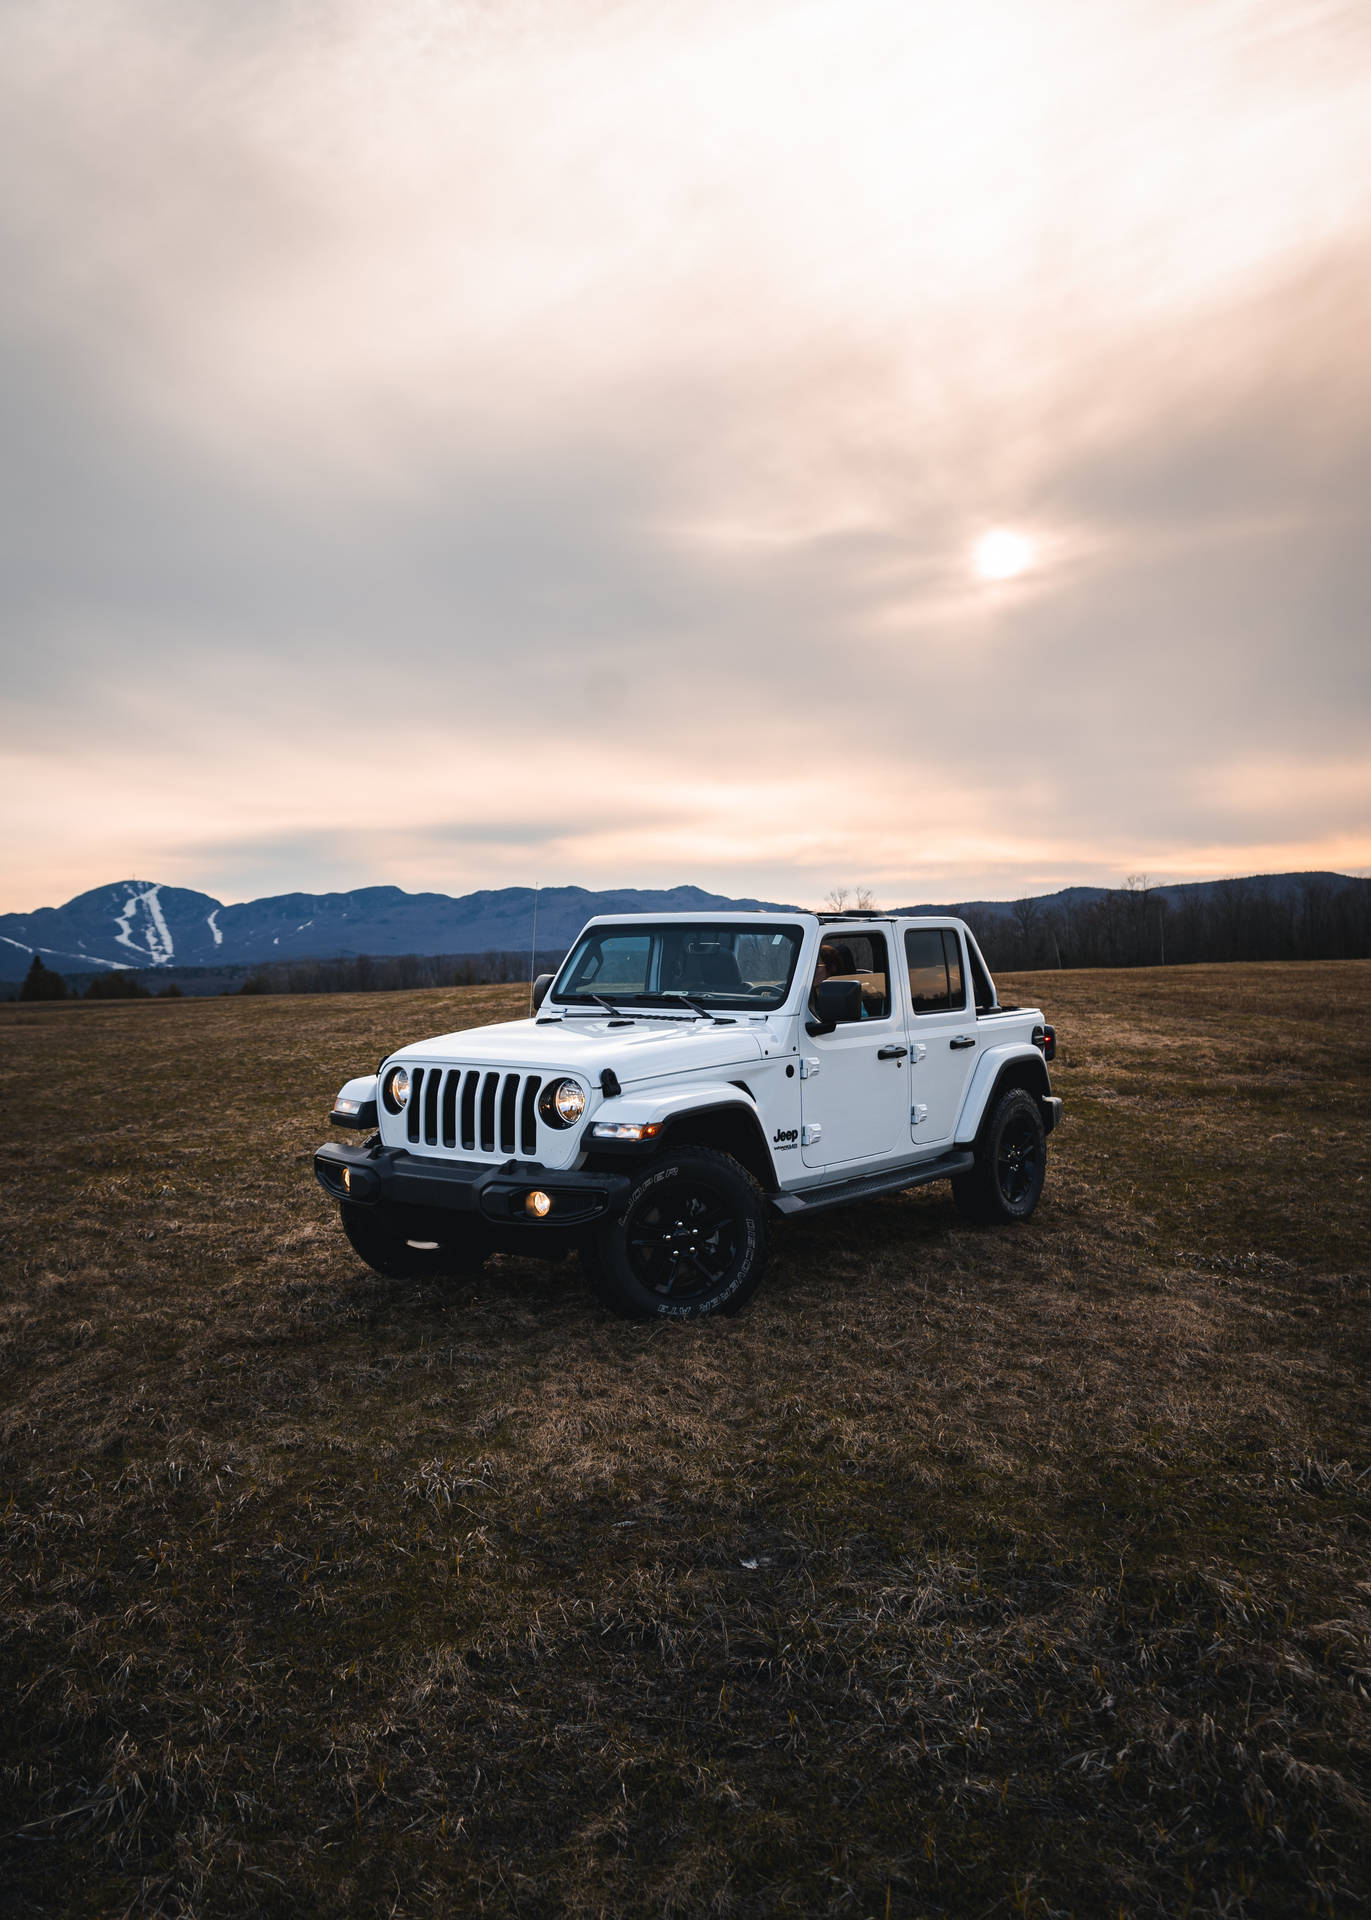 100+] Jeep Wallpapers for FREE 